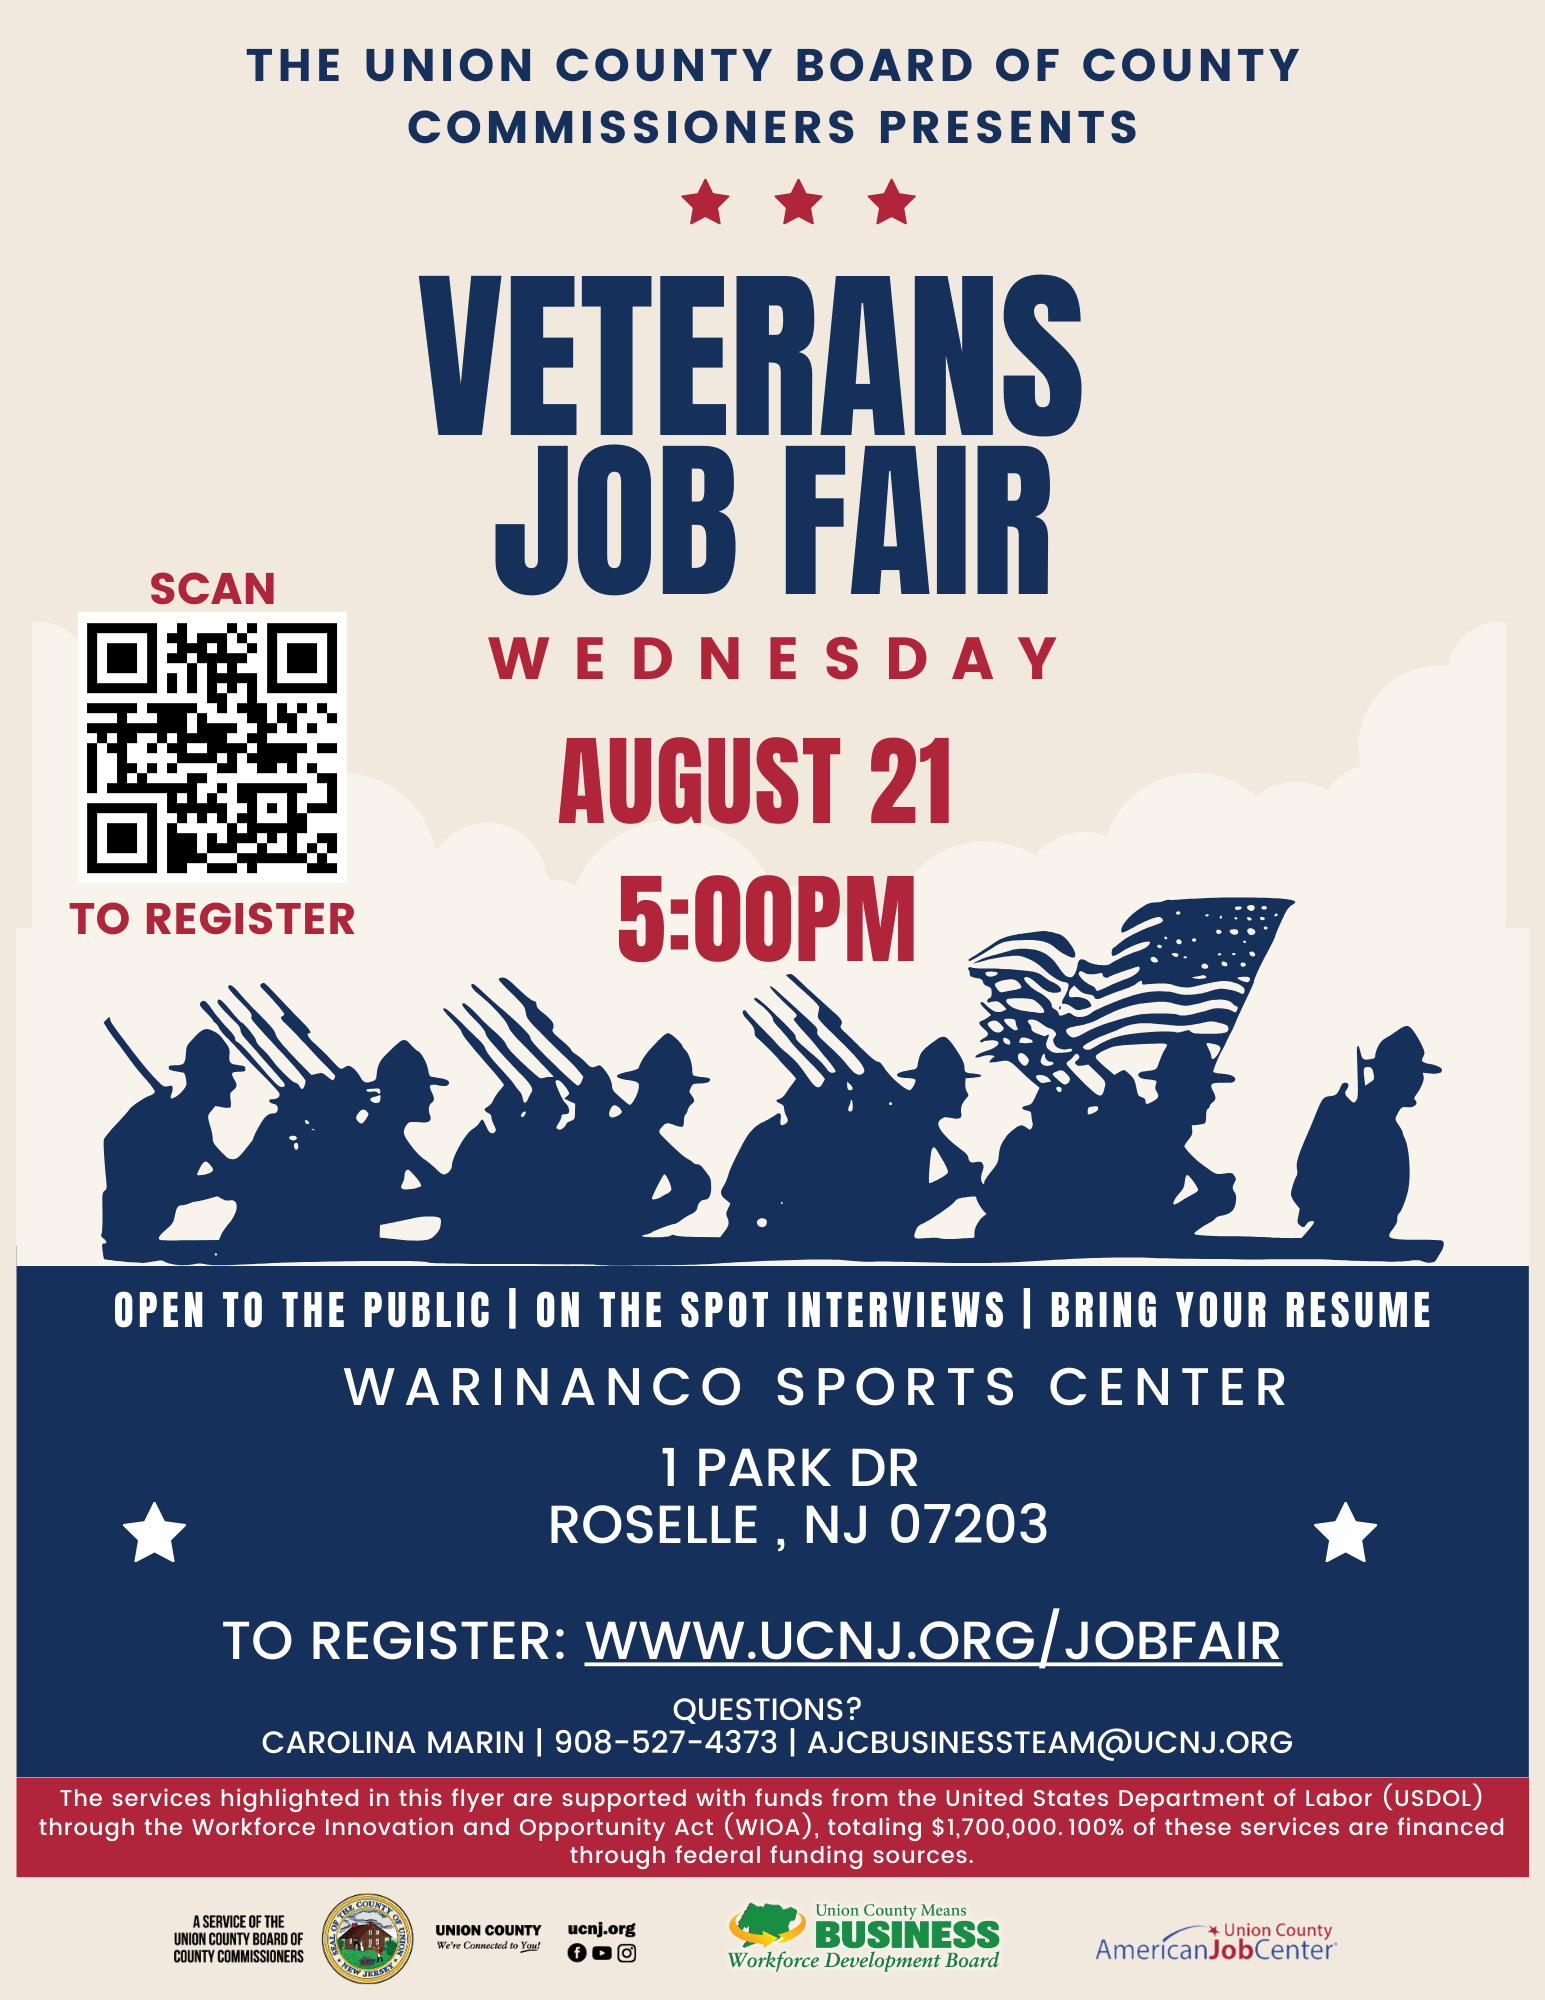 Union County Holds Veterans Job Fair for Residents Seeking Employment Opportunities on August 21st